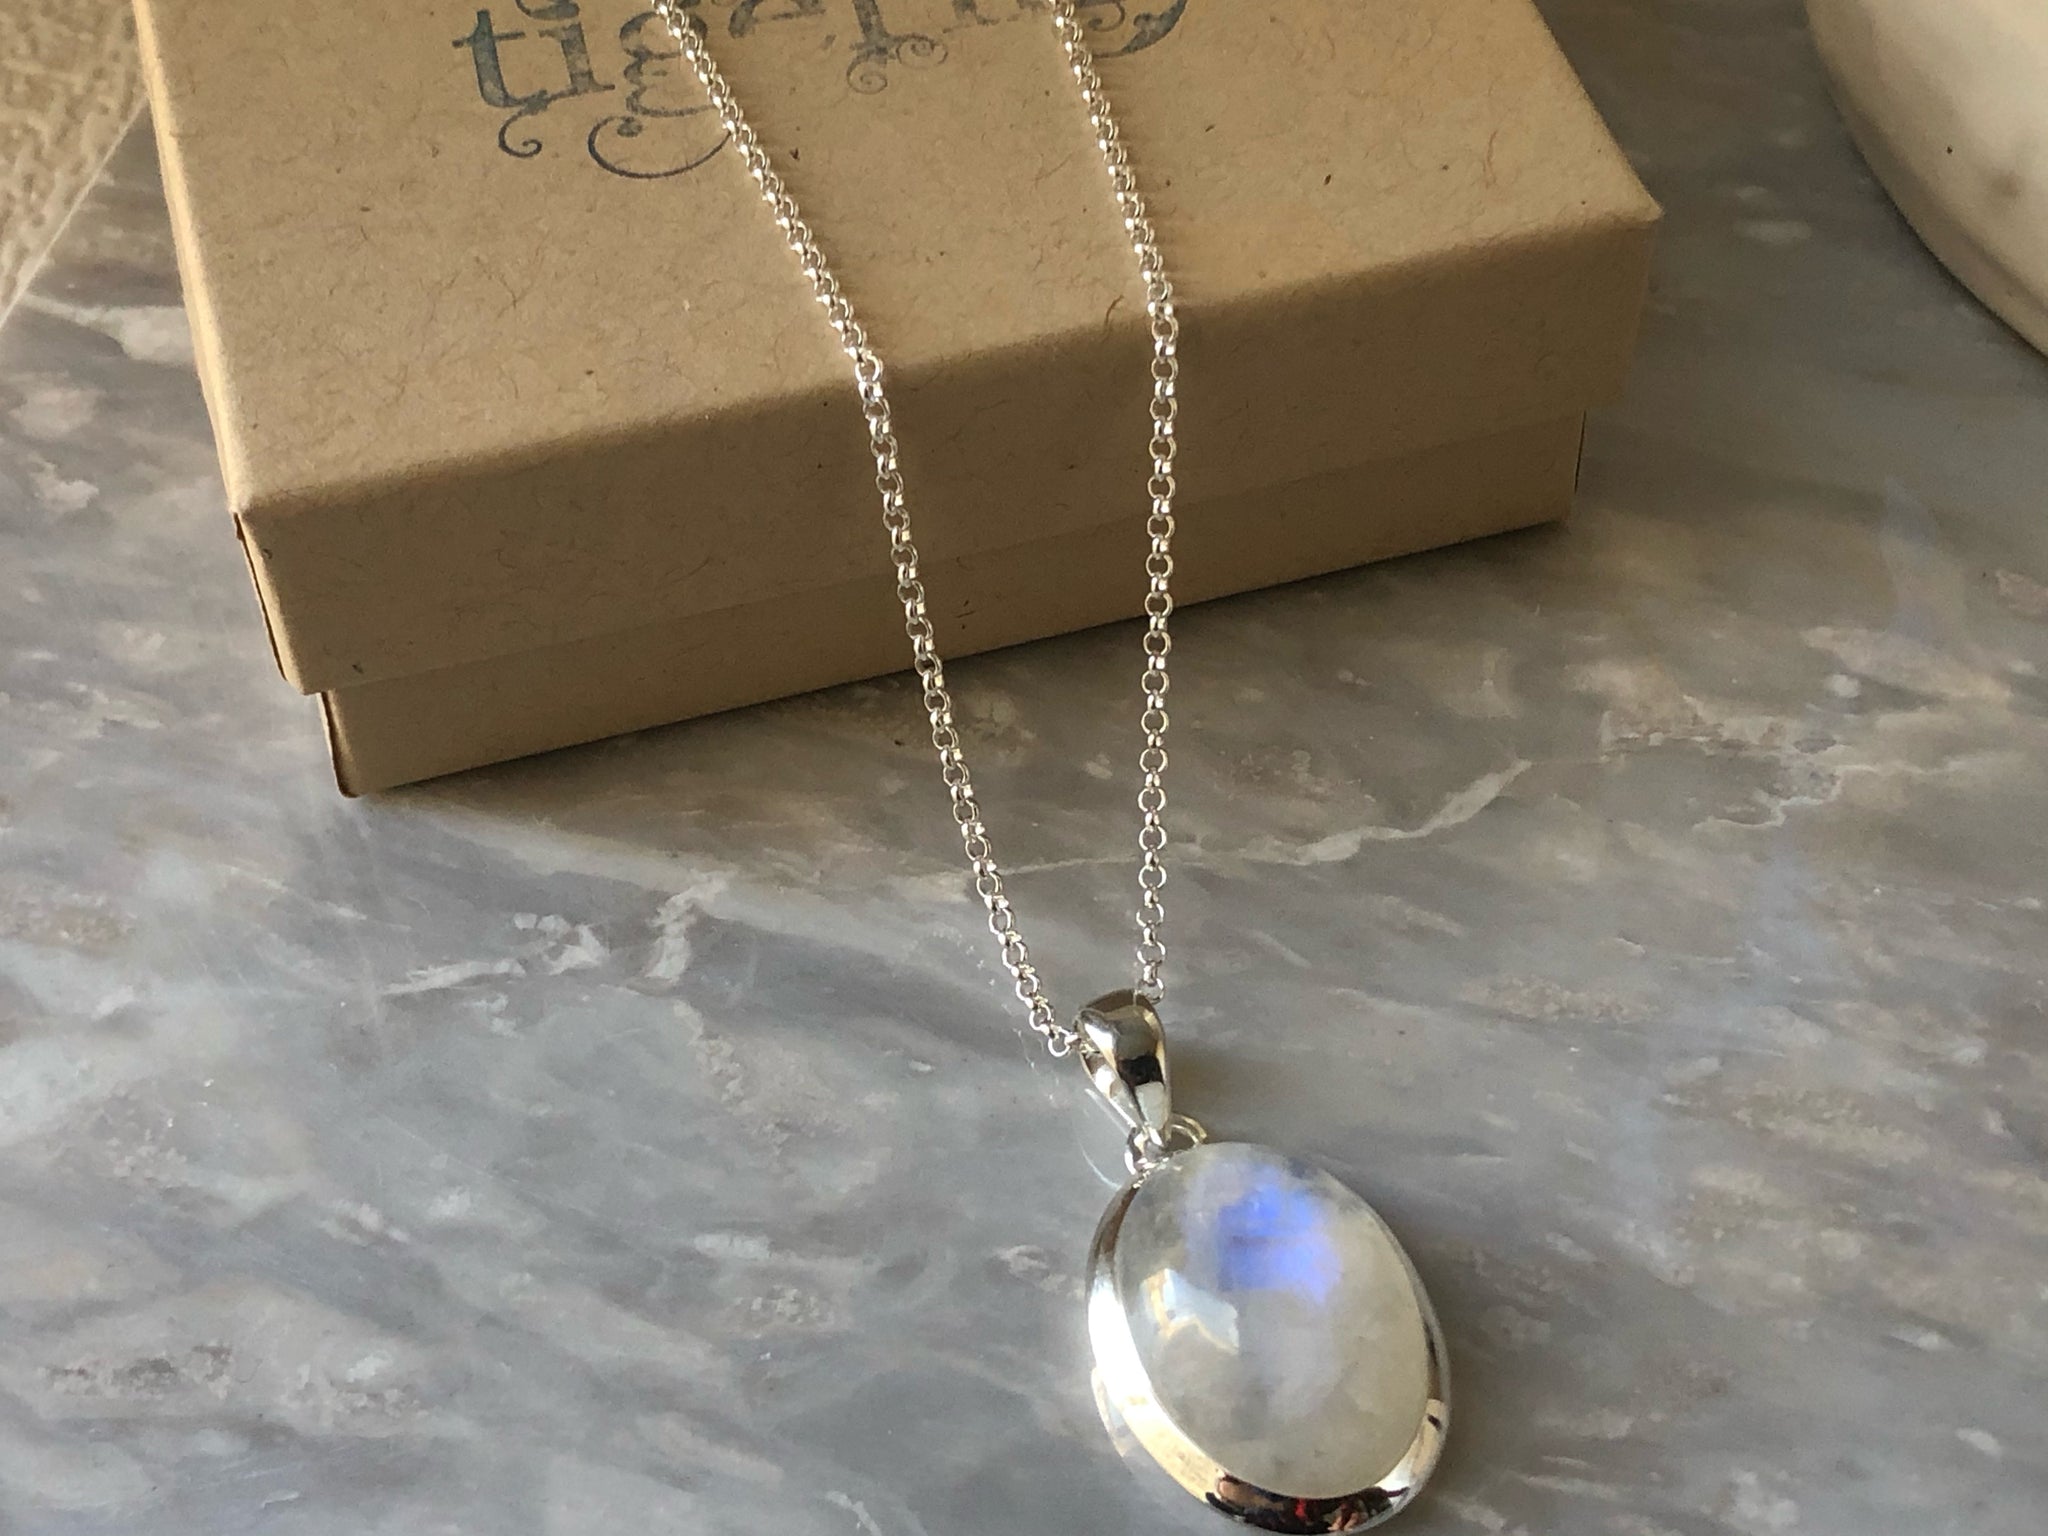 Vintage Silver Rainbow Moonstone Necklace Pendant for Women Party Xmas Gift  | eBay